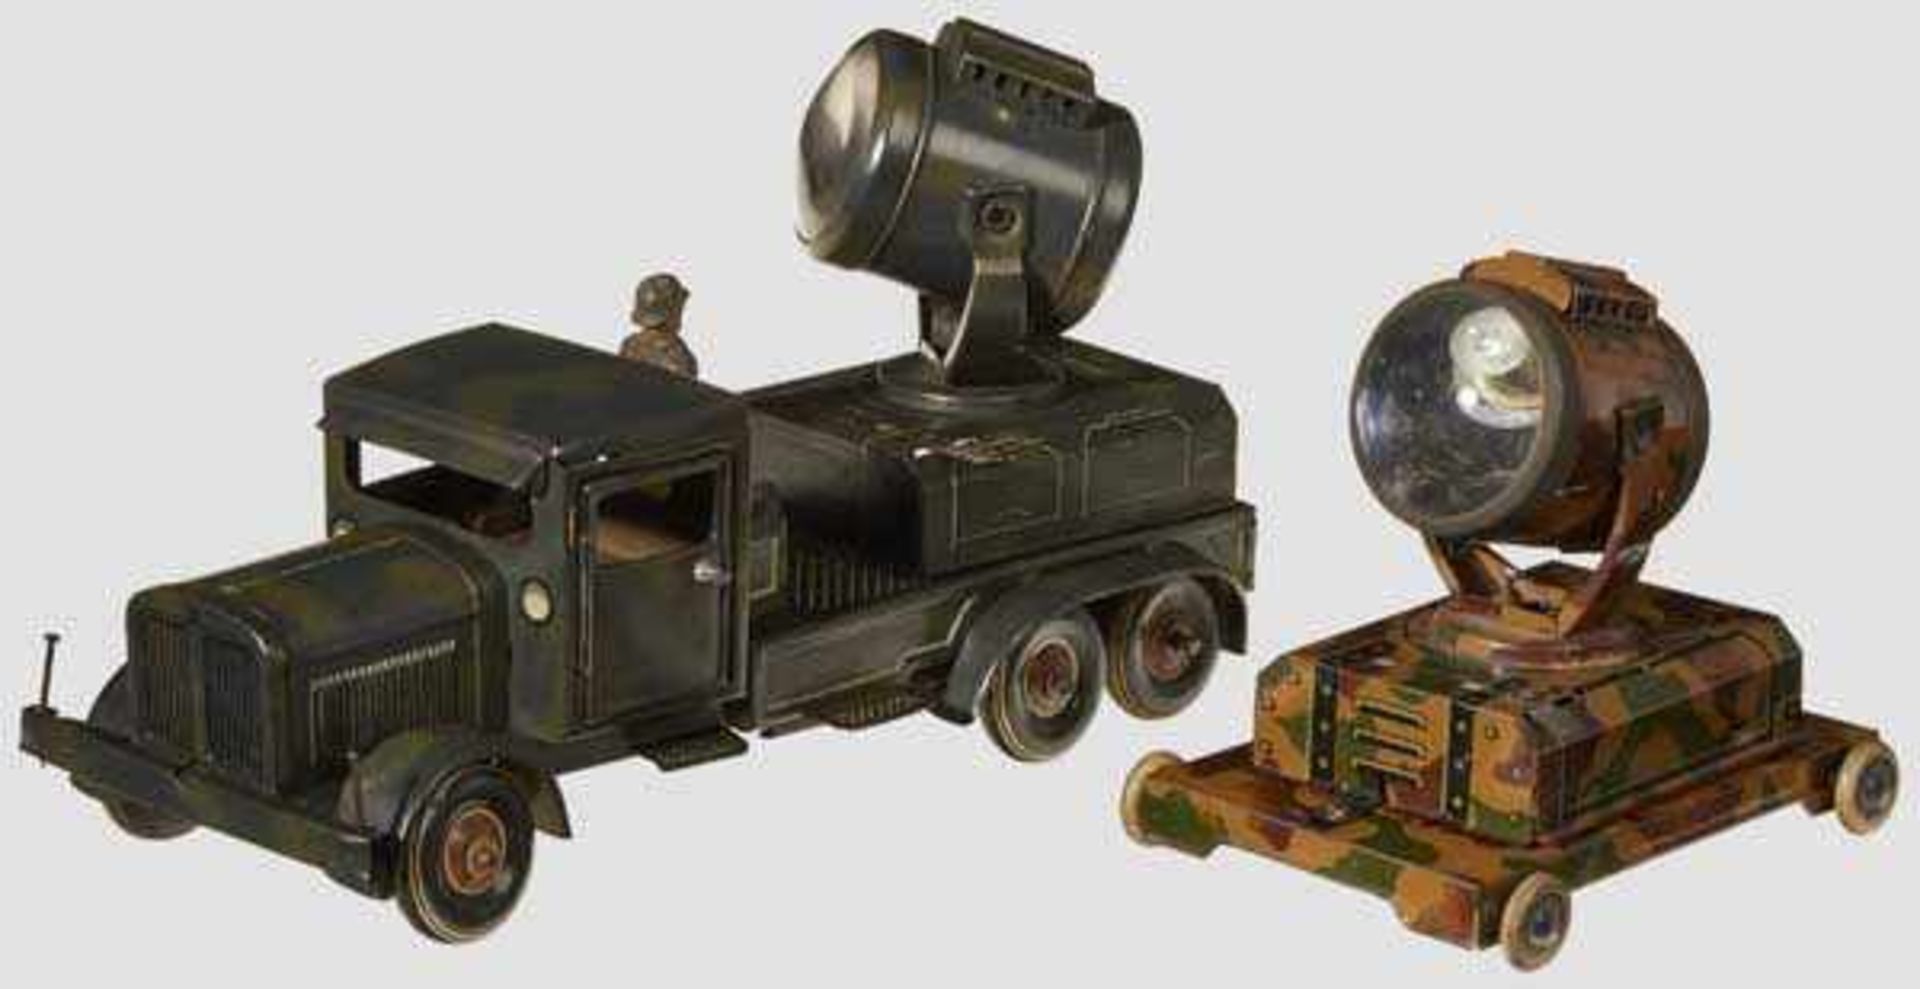 A Tipp & Co. # Dienstauto with # 244 Mobile Searchlight and 1 Figure TippCo, lithographed tin car